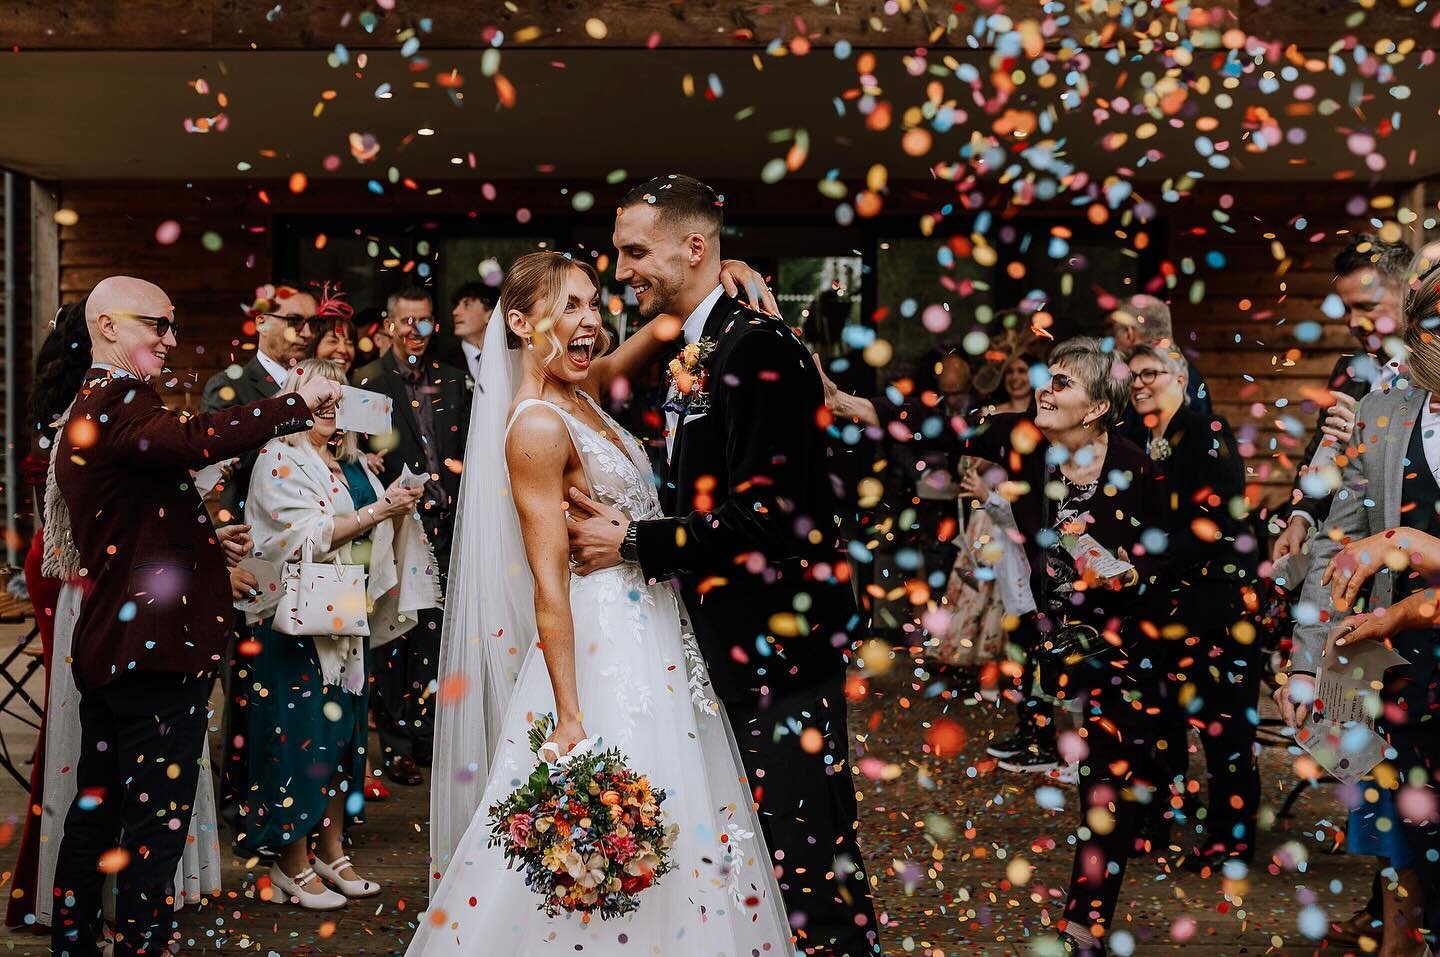 There&rsquo;s just too many amazing photos from Spence &amp; Gee&rsquo;s big day yesterday at the stunning @themillbarnsvenue 💕 it was so full of colour &amp; fun, and the bridal party really brought the energy 🥂🌟